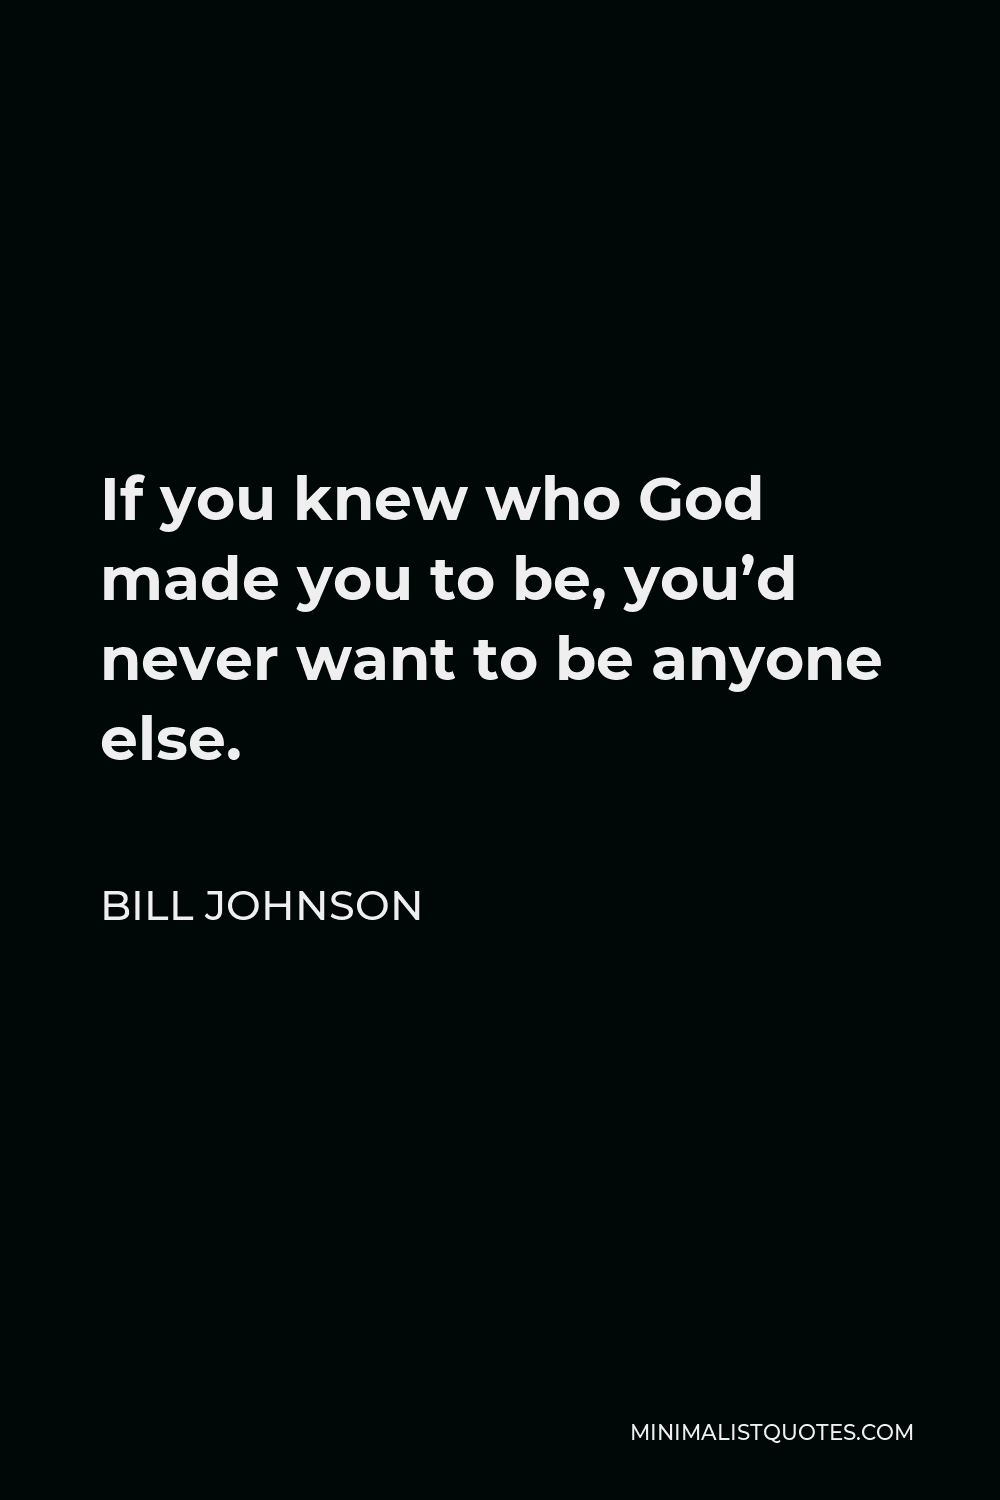 Bill Johnson Quote - If you knew who God made you to be, you’d never want to be anyone else.